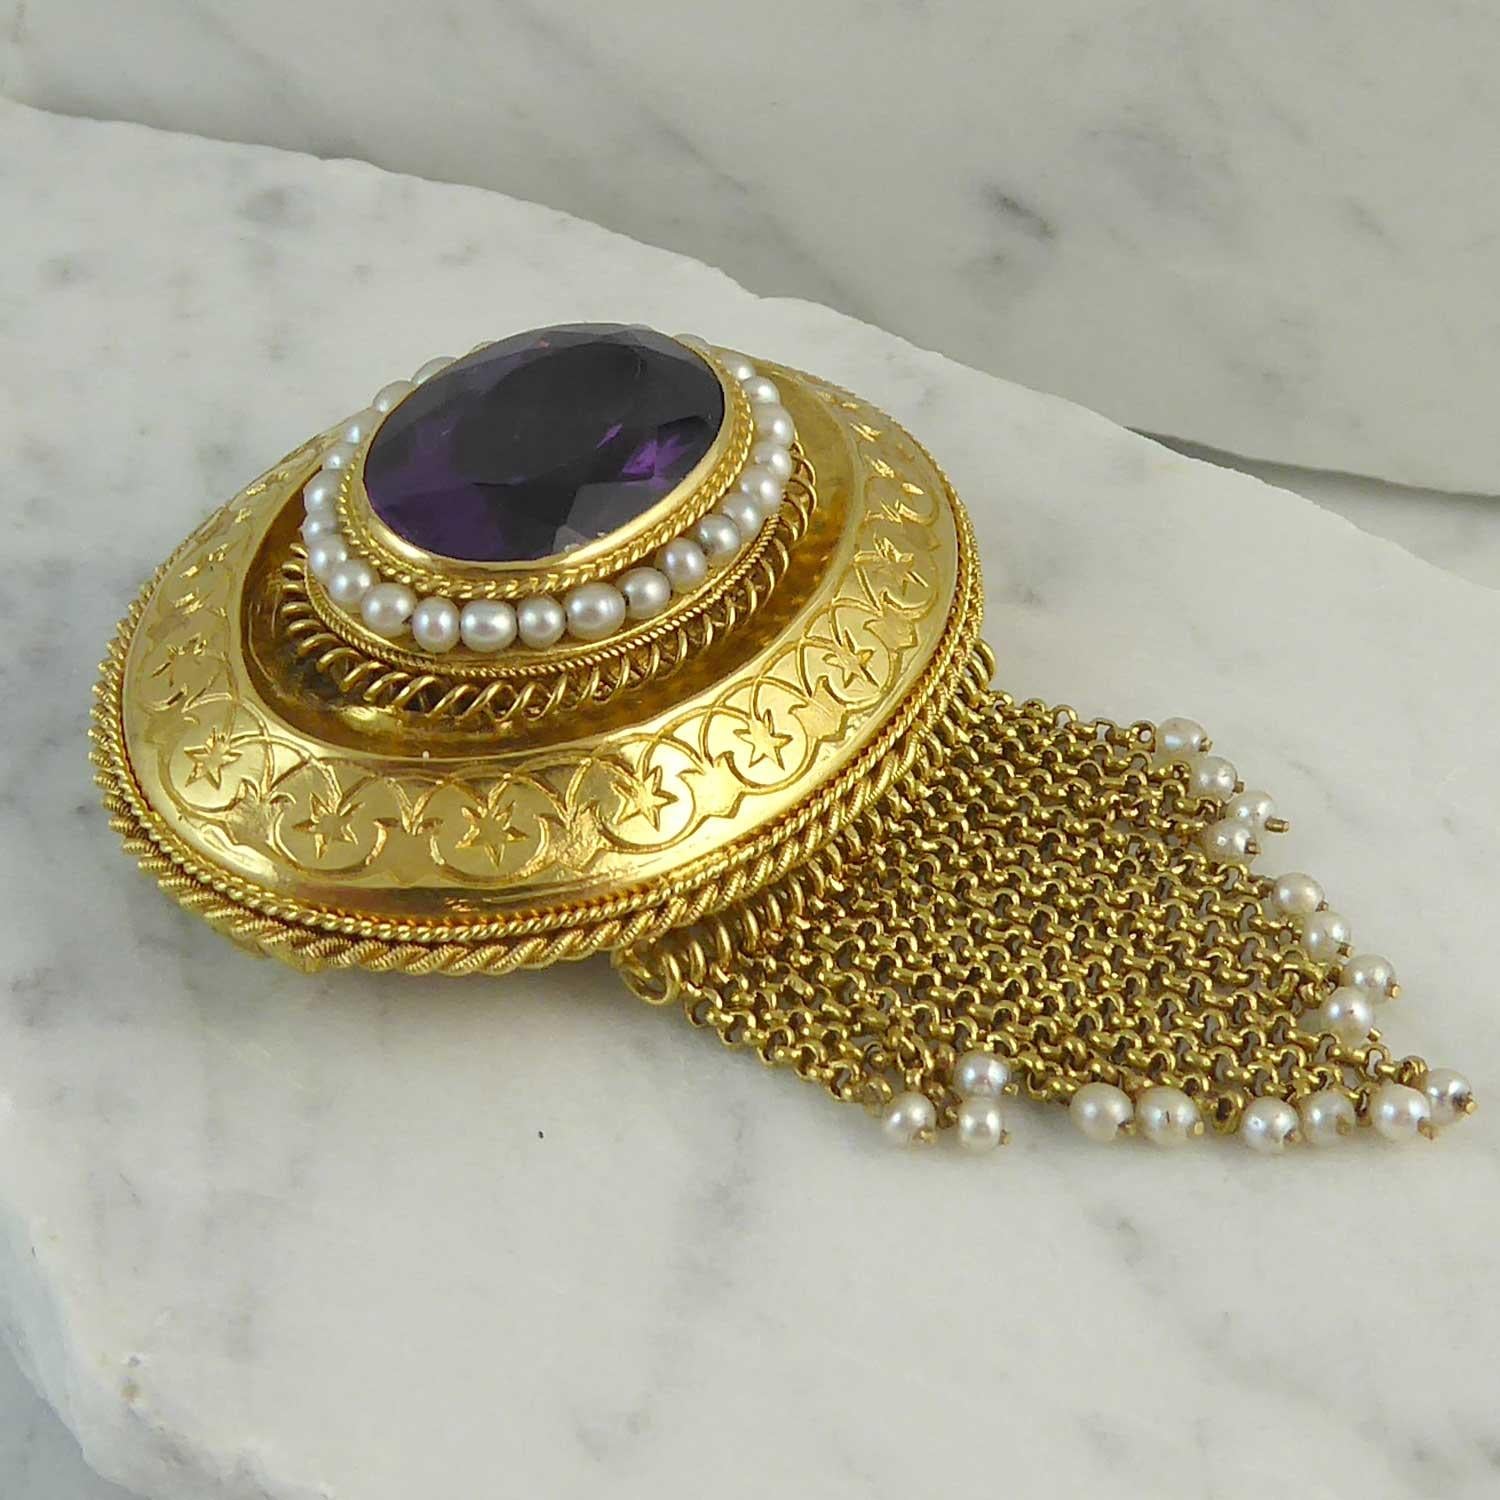 Women's Antique Victorian Amethyst and Pearl Fringed Brooch, circa 1860s, 18 Carat Gold